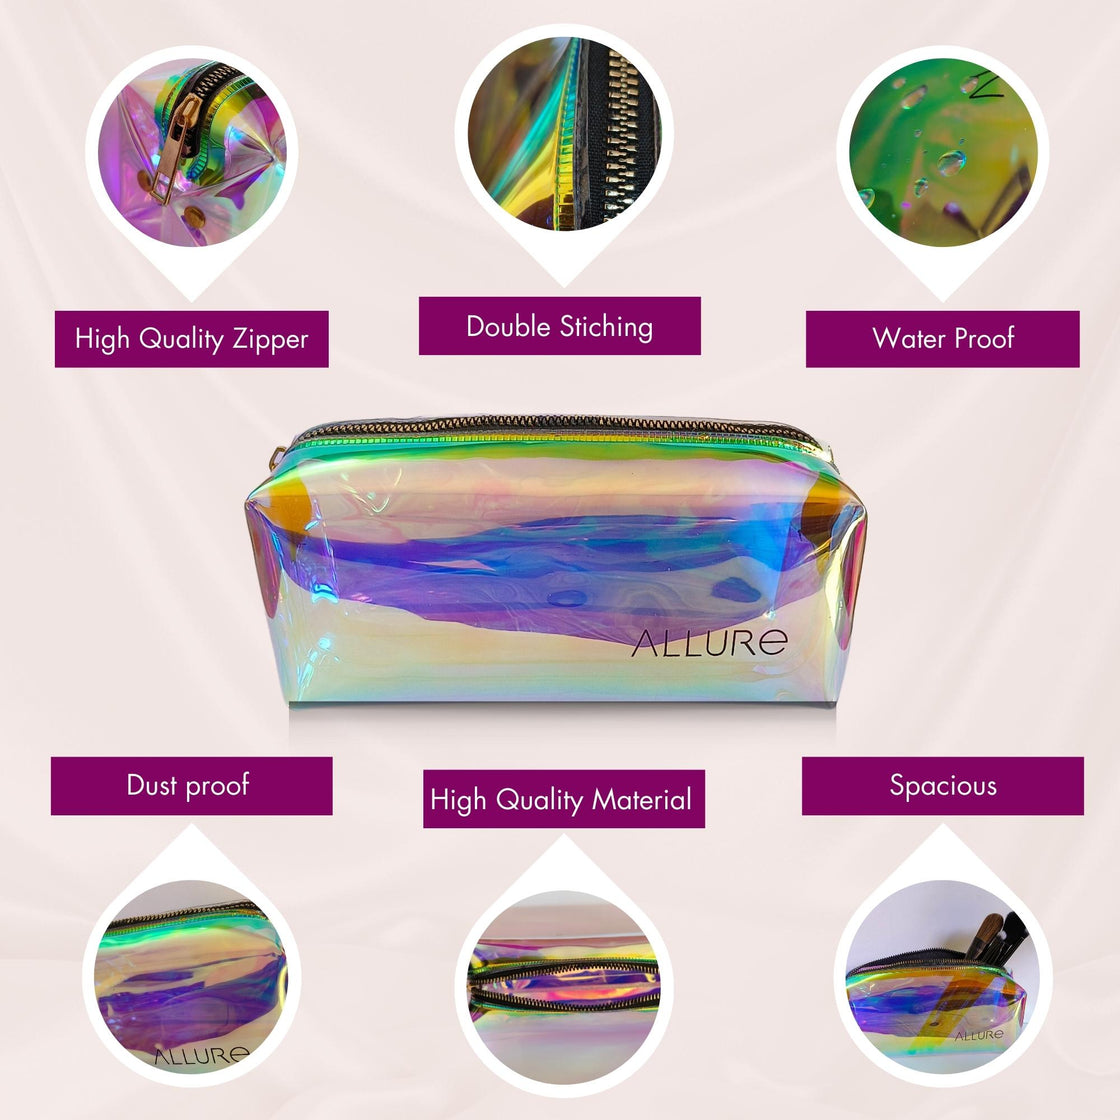 Allure Holographic Cosmetic Pouch